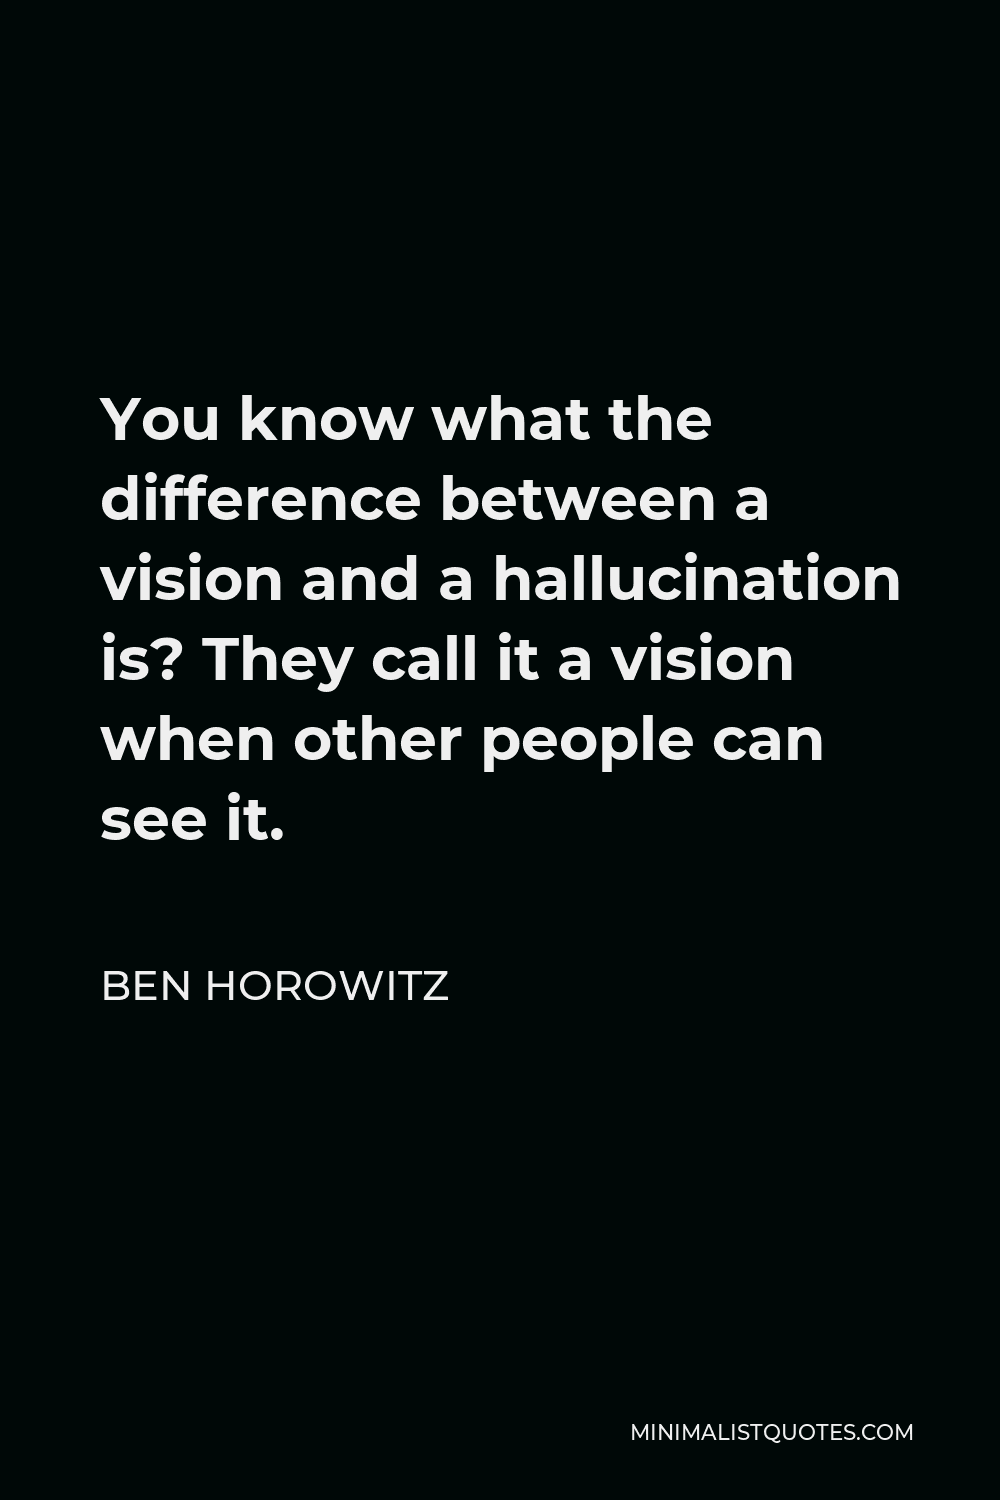 Ben Horowitz Quote - You know what the difference between a vision and a hallucination is? They call it a vision when other people can see it.